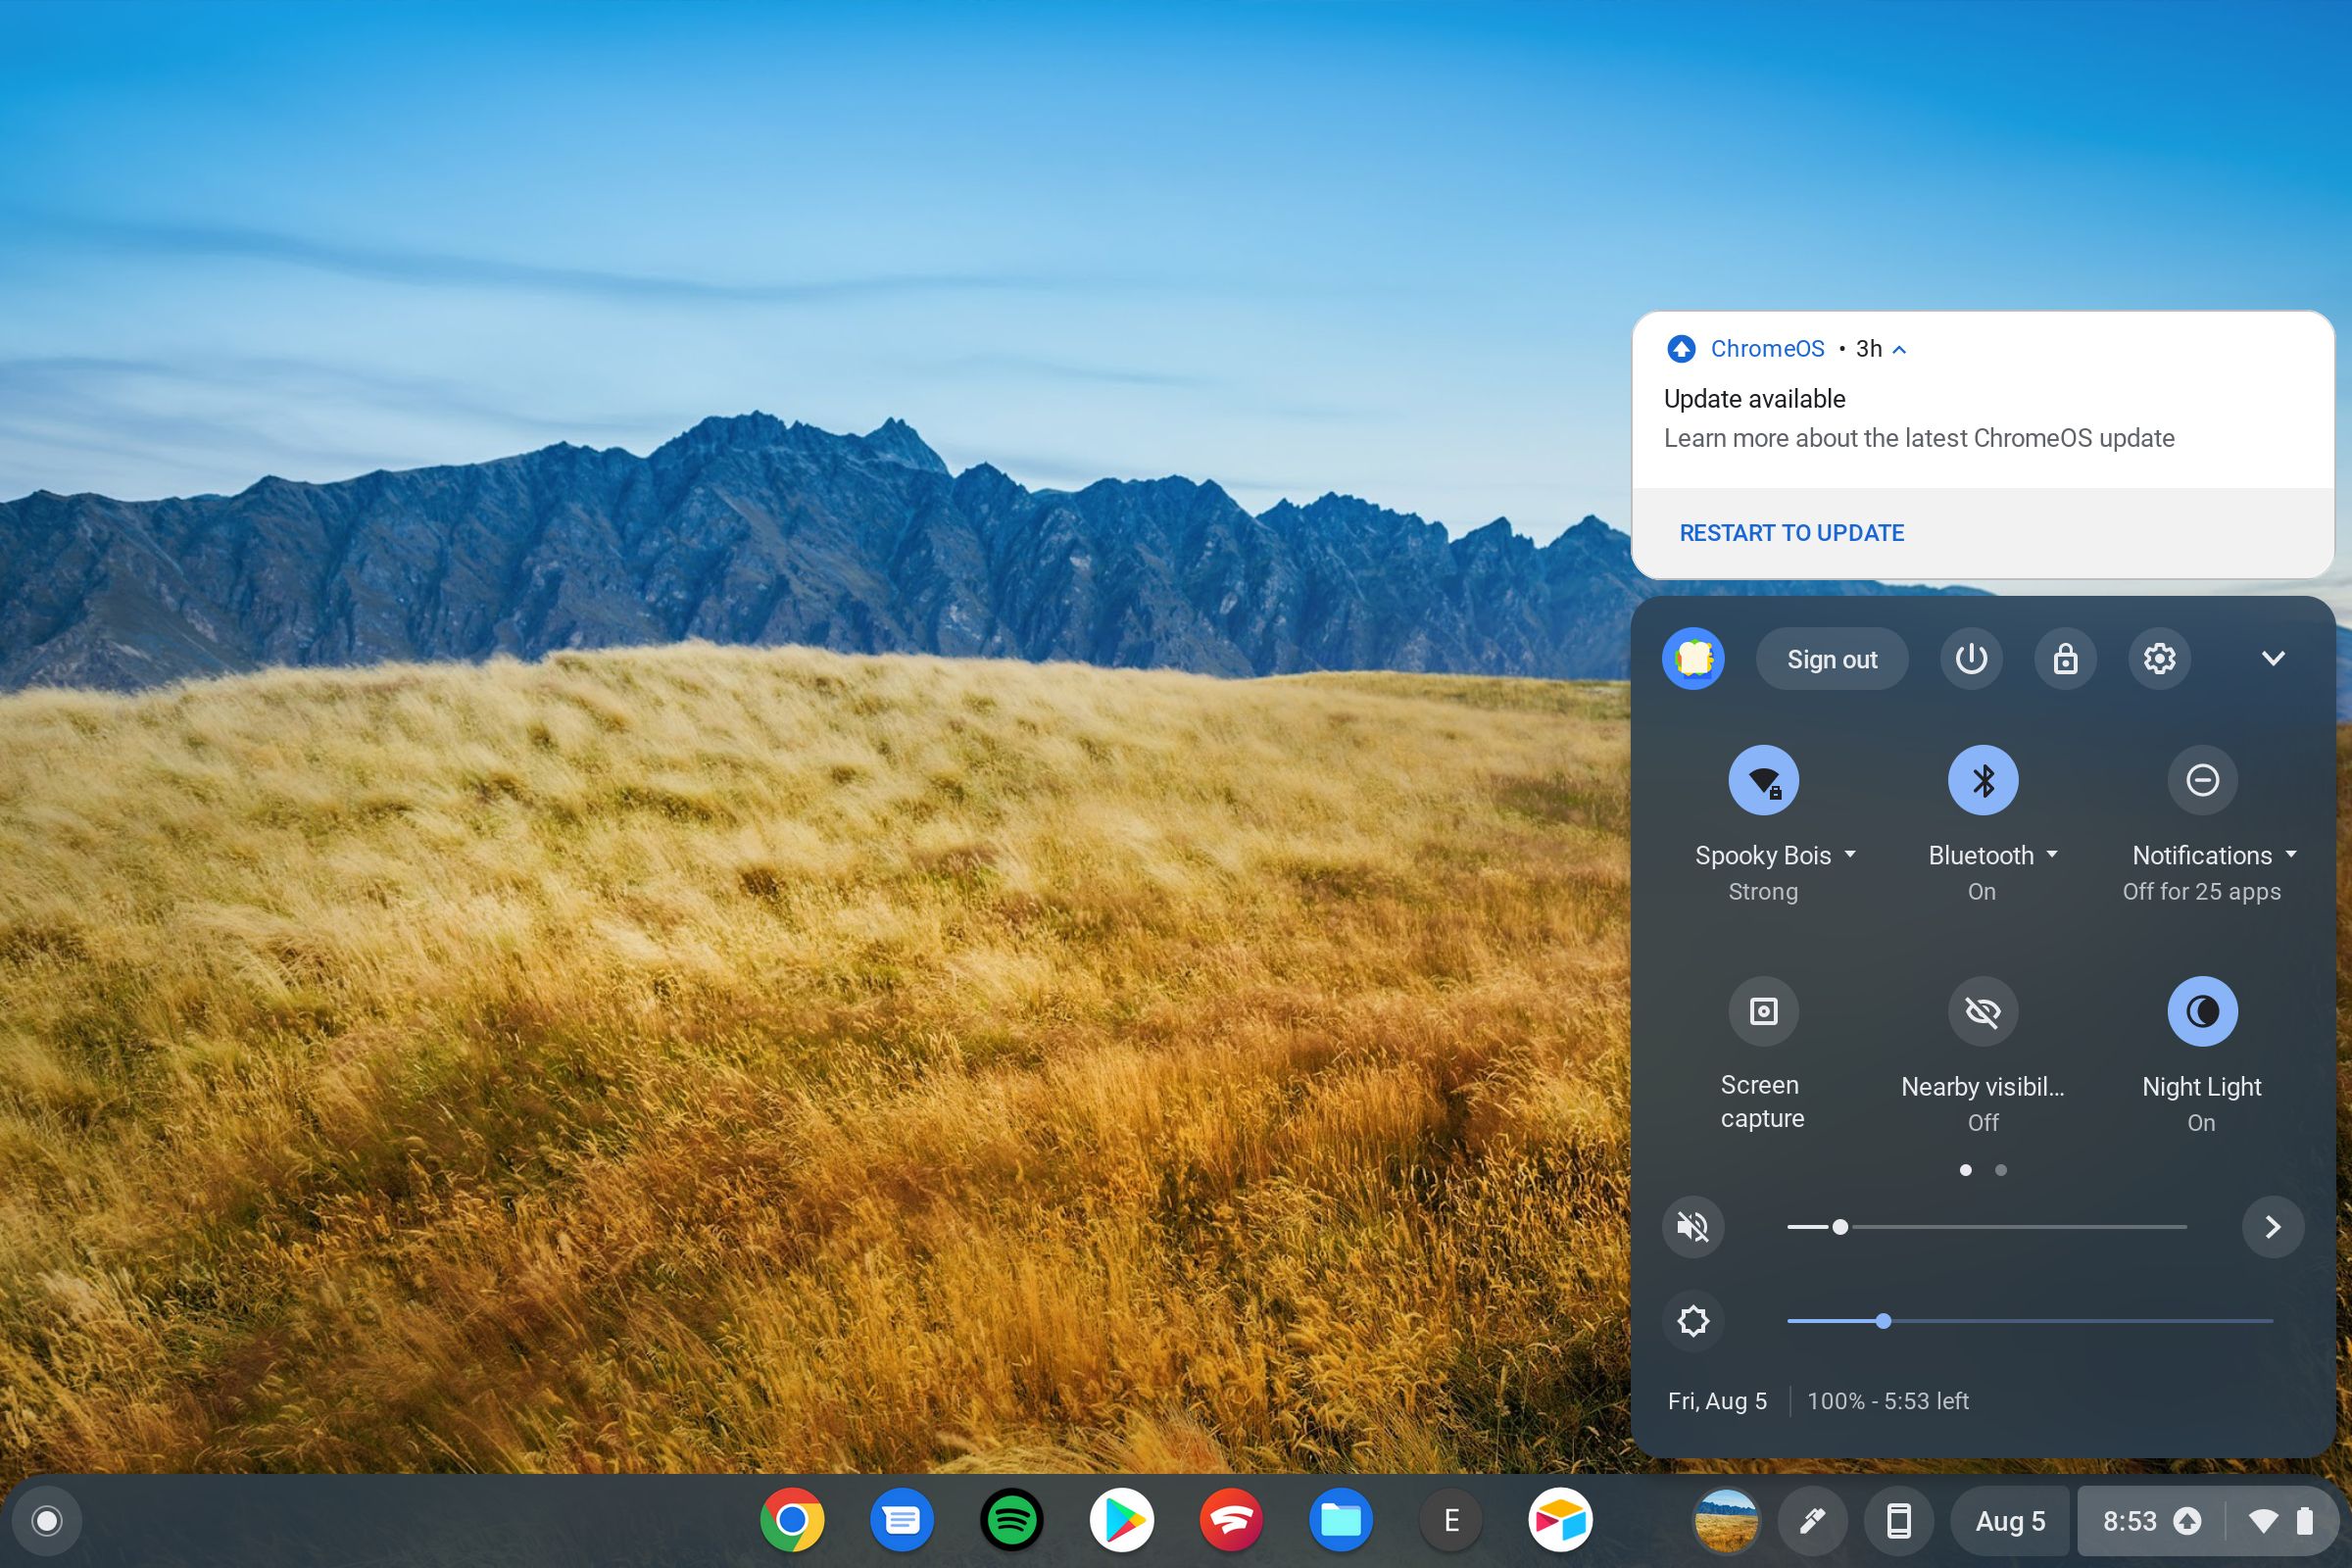 The Chromebook notification center with an update notification.